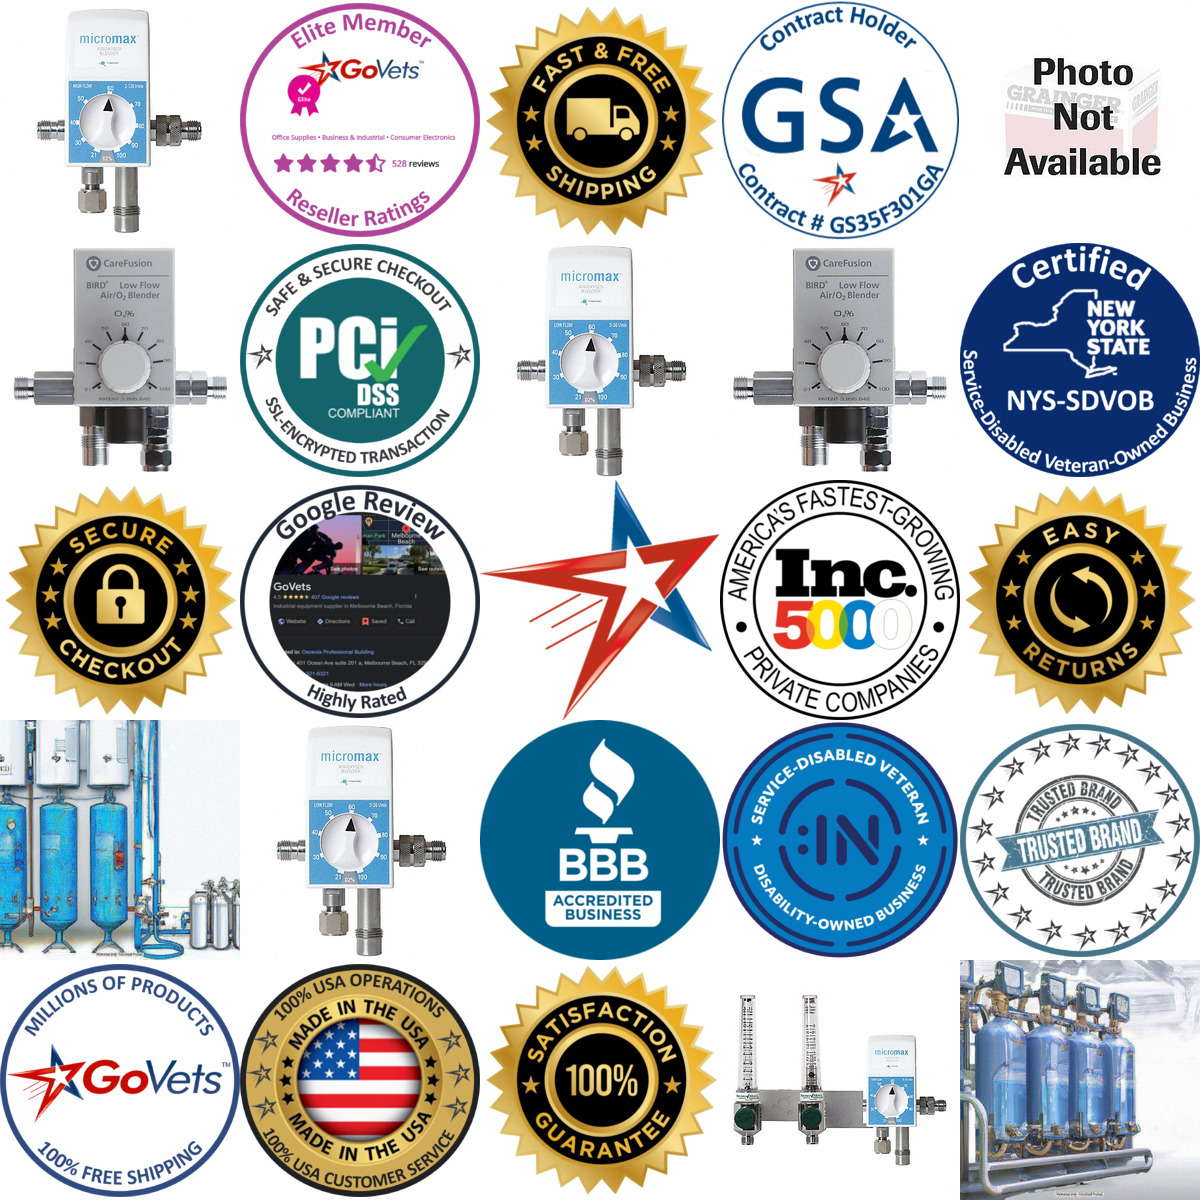 A selection of Air Oxygen Mixers and Blenders products on GoVets